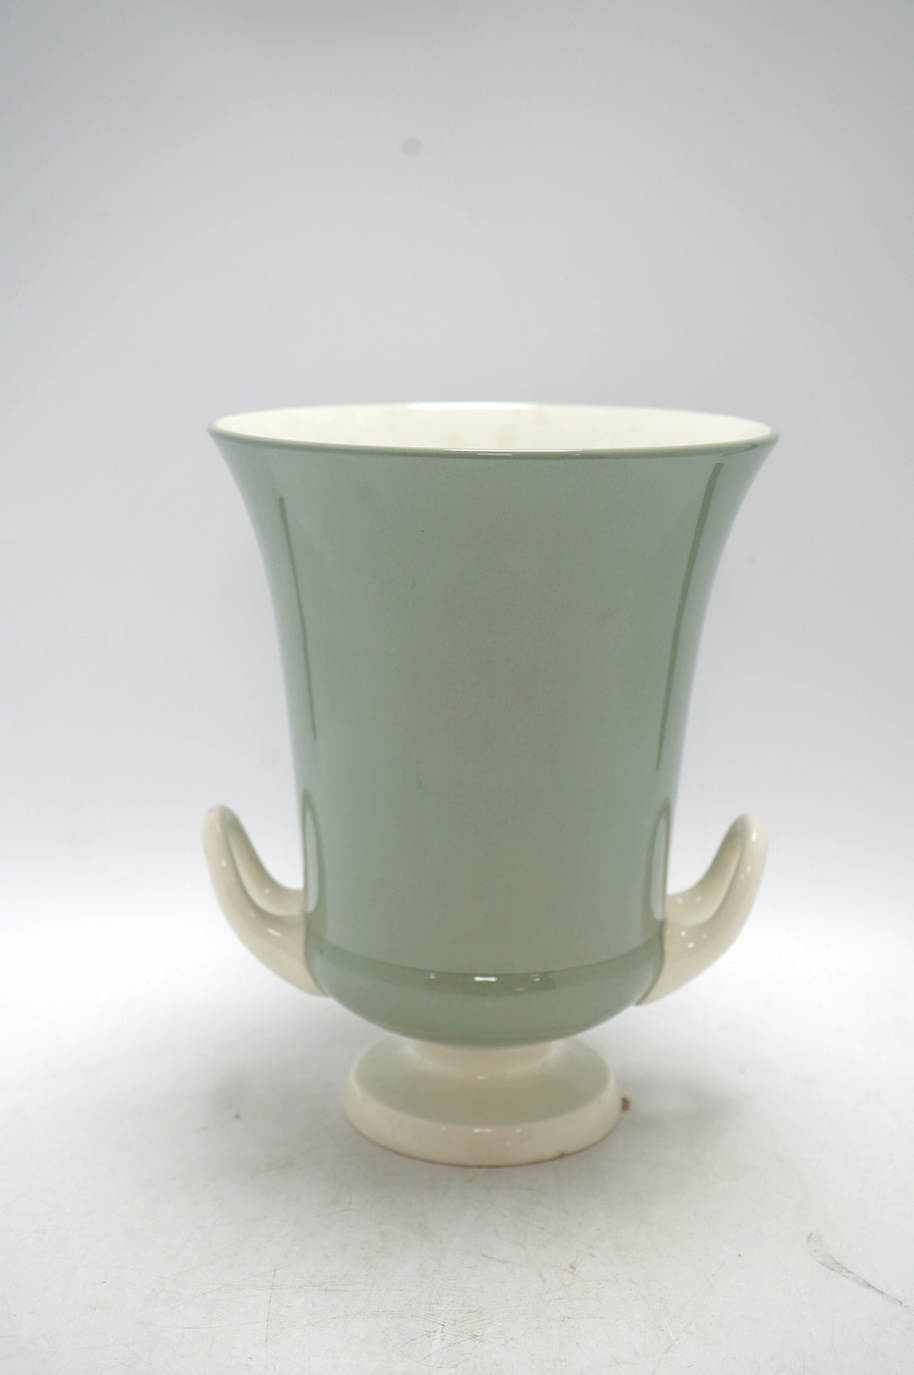 Keith Murray, a Wedgwood celadon glazed two handled vase, 25.5cm. Condition - good